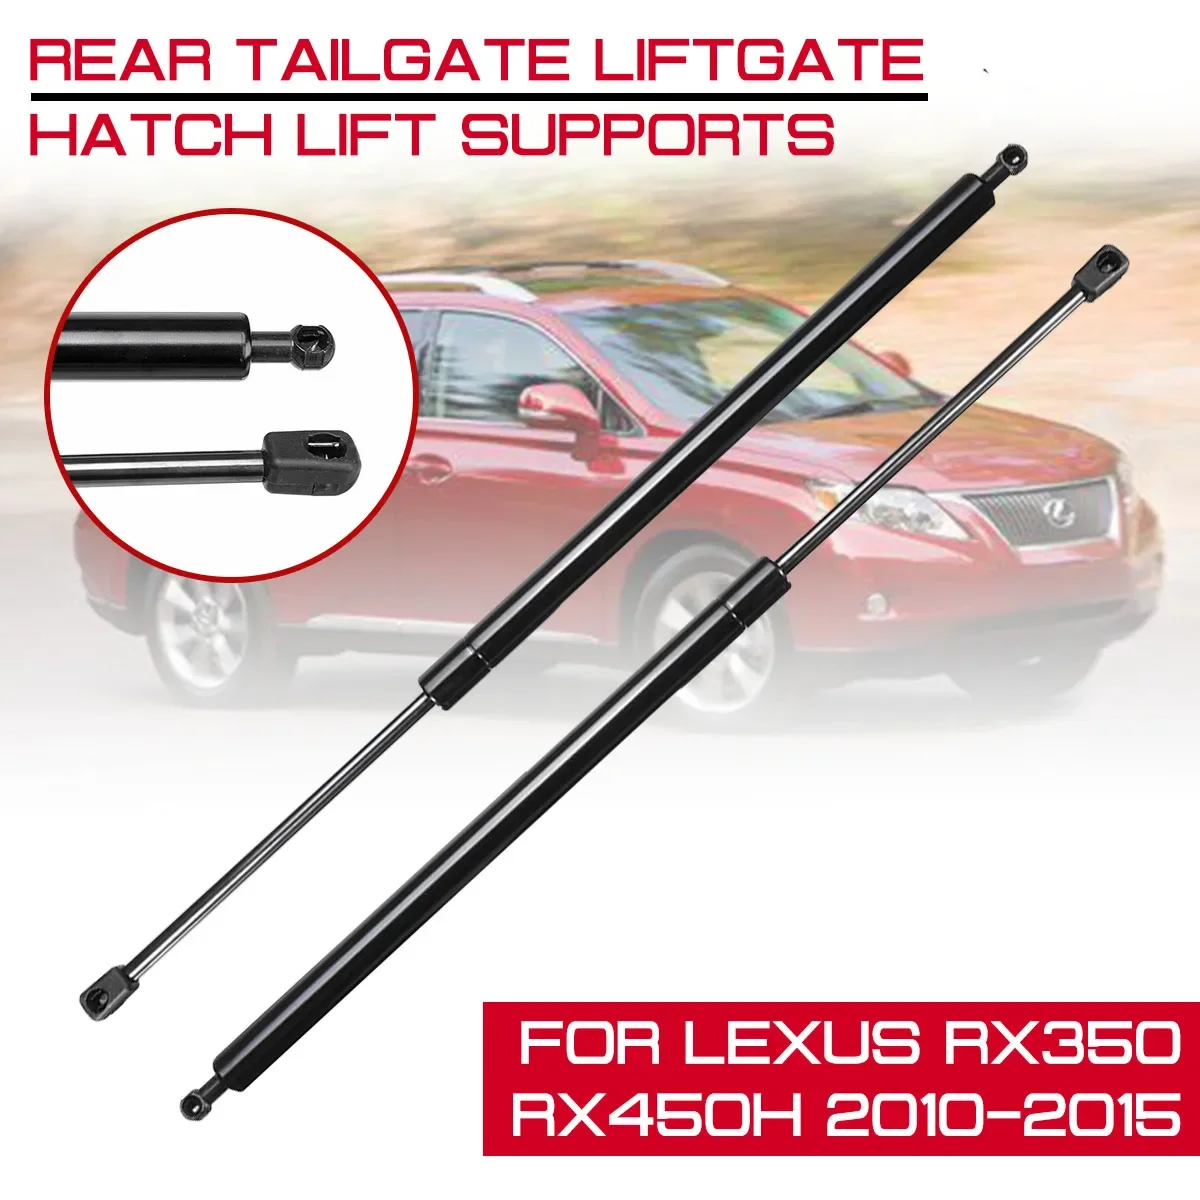 

Car Rear Trunk Tailgate Tail Gate Boot Gas Spring Shock Lift Struts For Lexus RX350 RX450h 2010 2011 - 2015 Support Rod Arm Bar